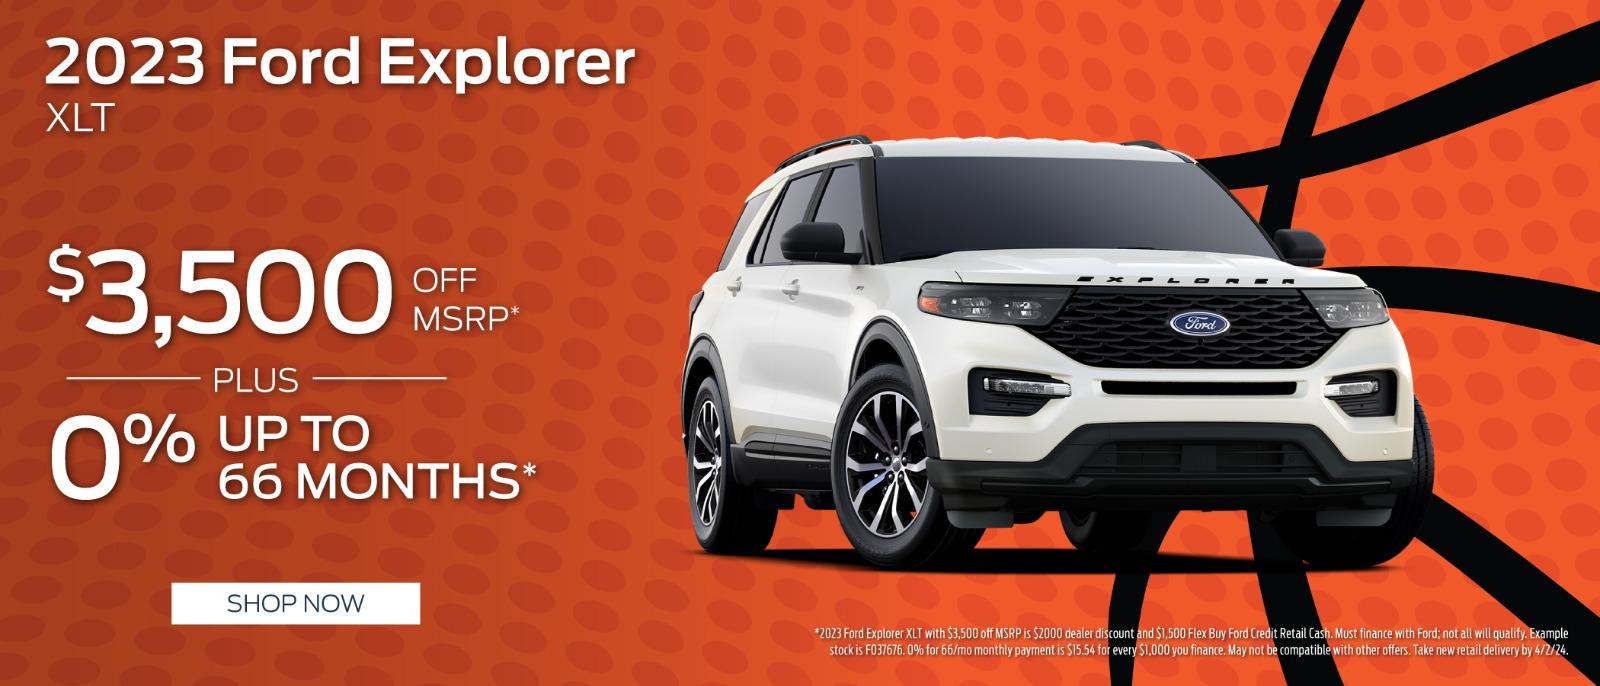 2023 Ford Explorer $3,500 Off MSRP plus up to 0% for 66 months